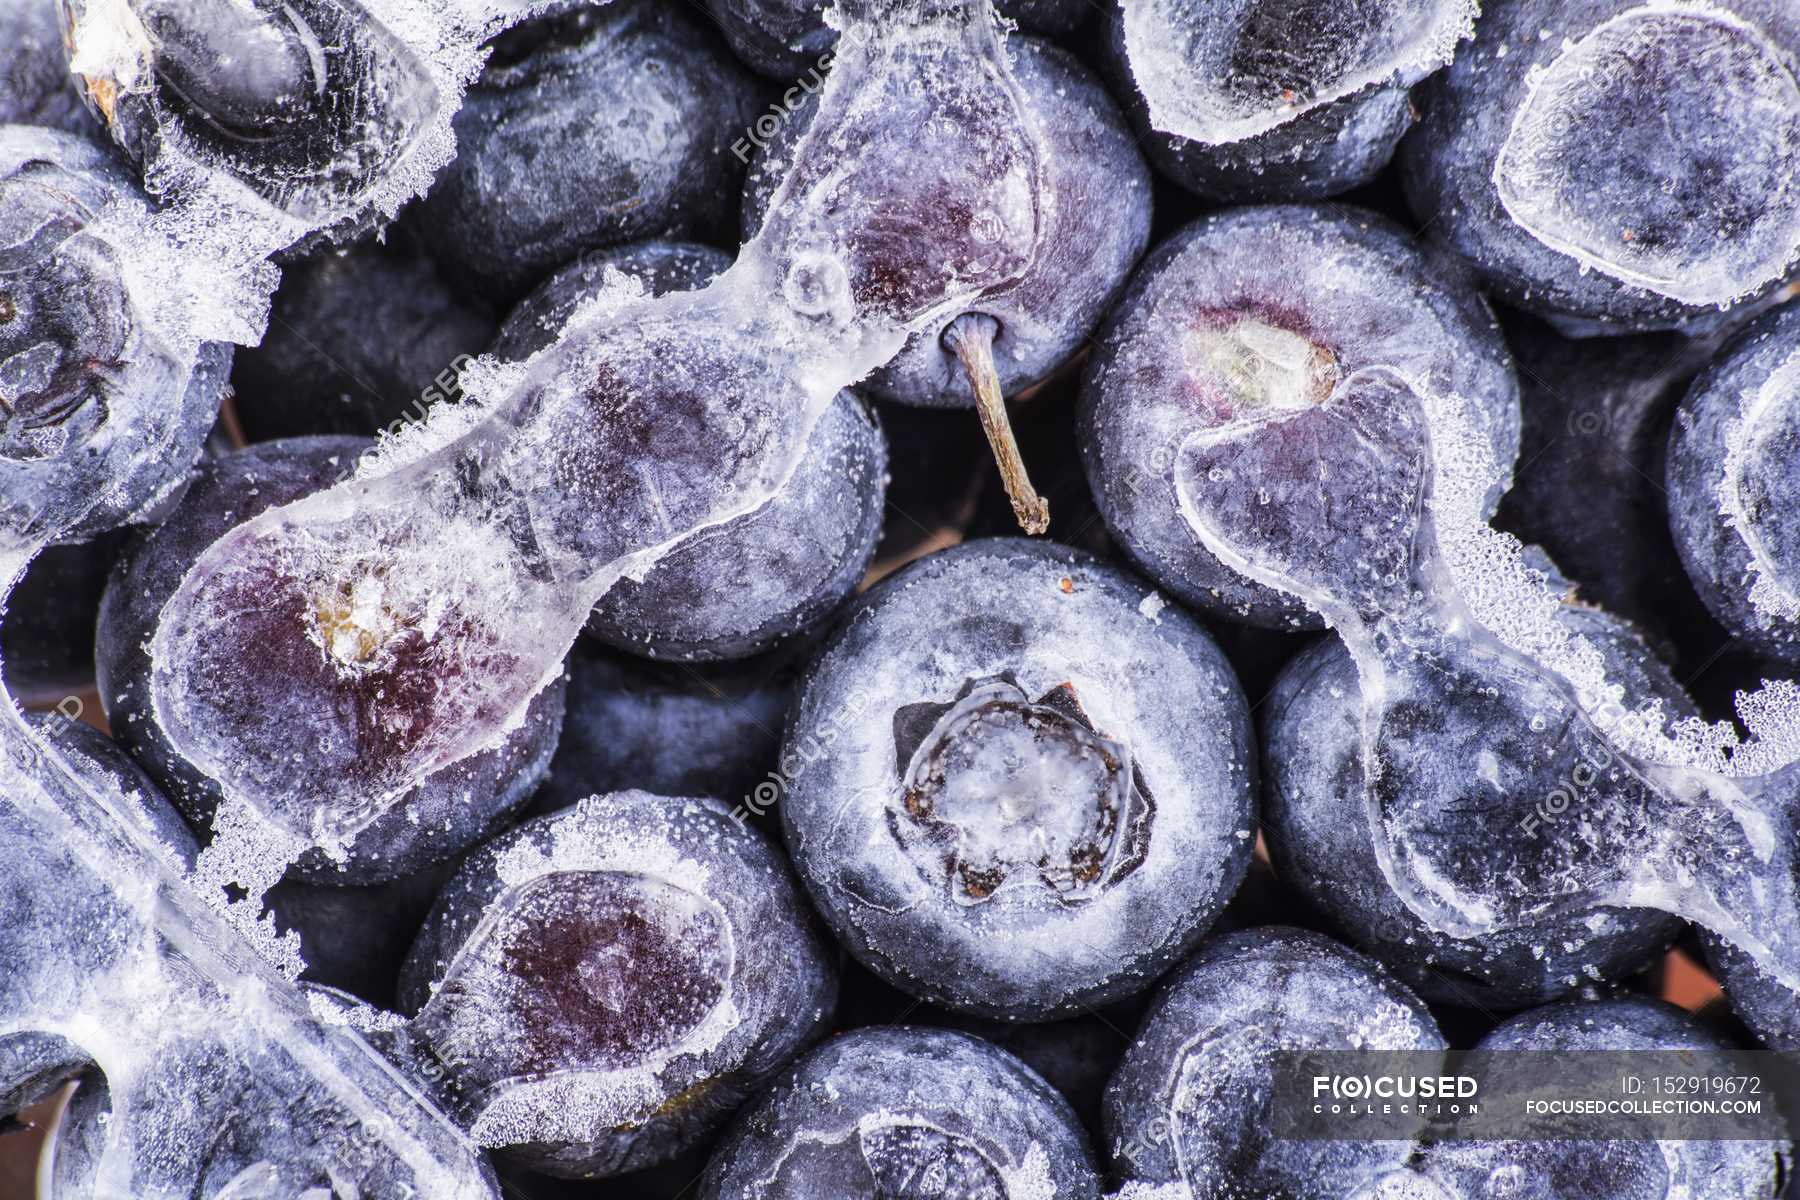 Frozen blueberries with ice — background, organic food - Stock Photo ...